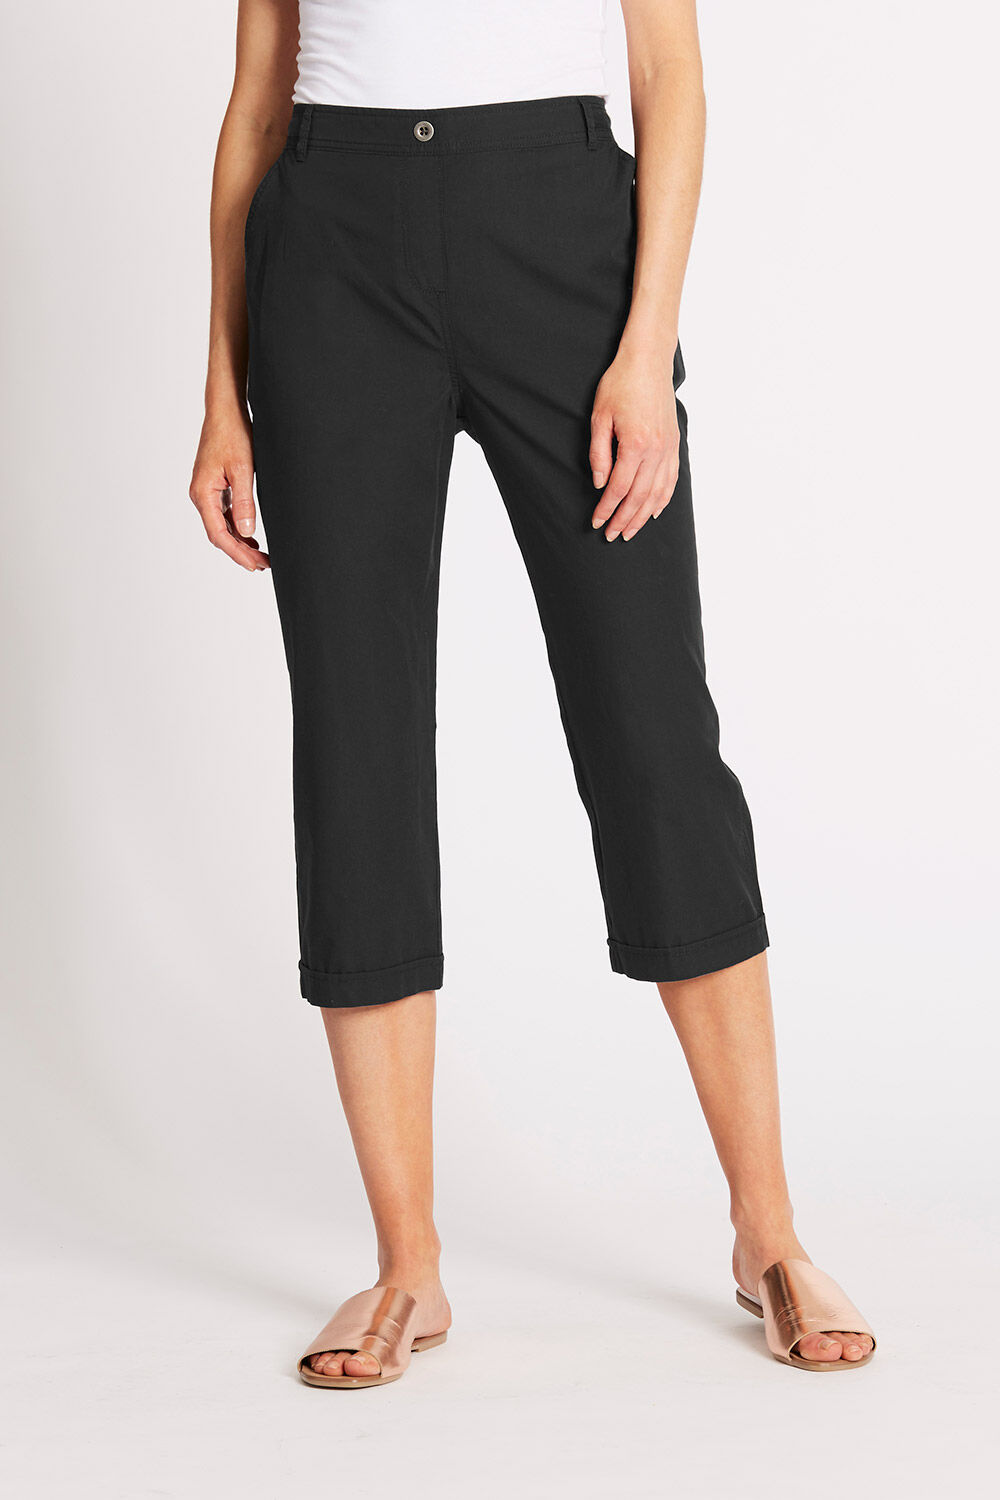 Wrinkle Free PullOn Crop Trousers at Cotton Traders